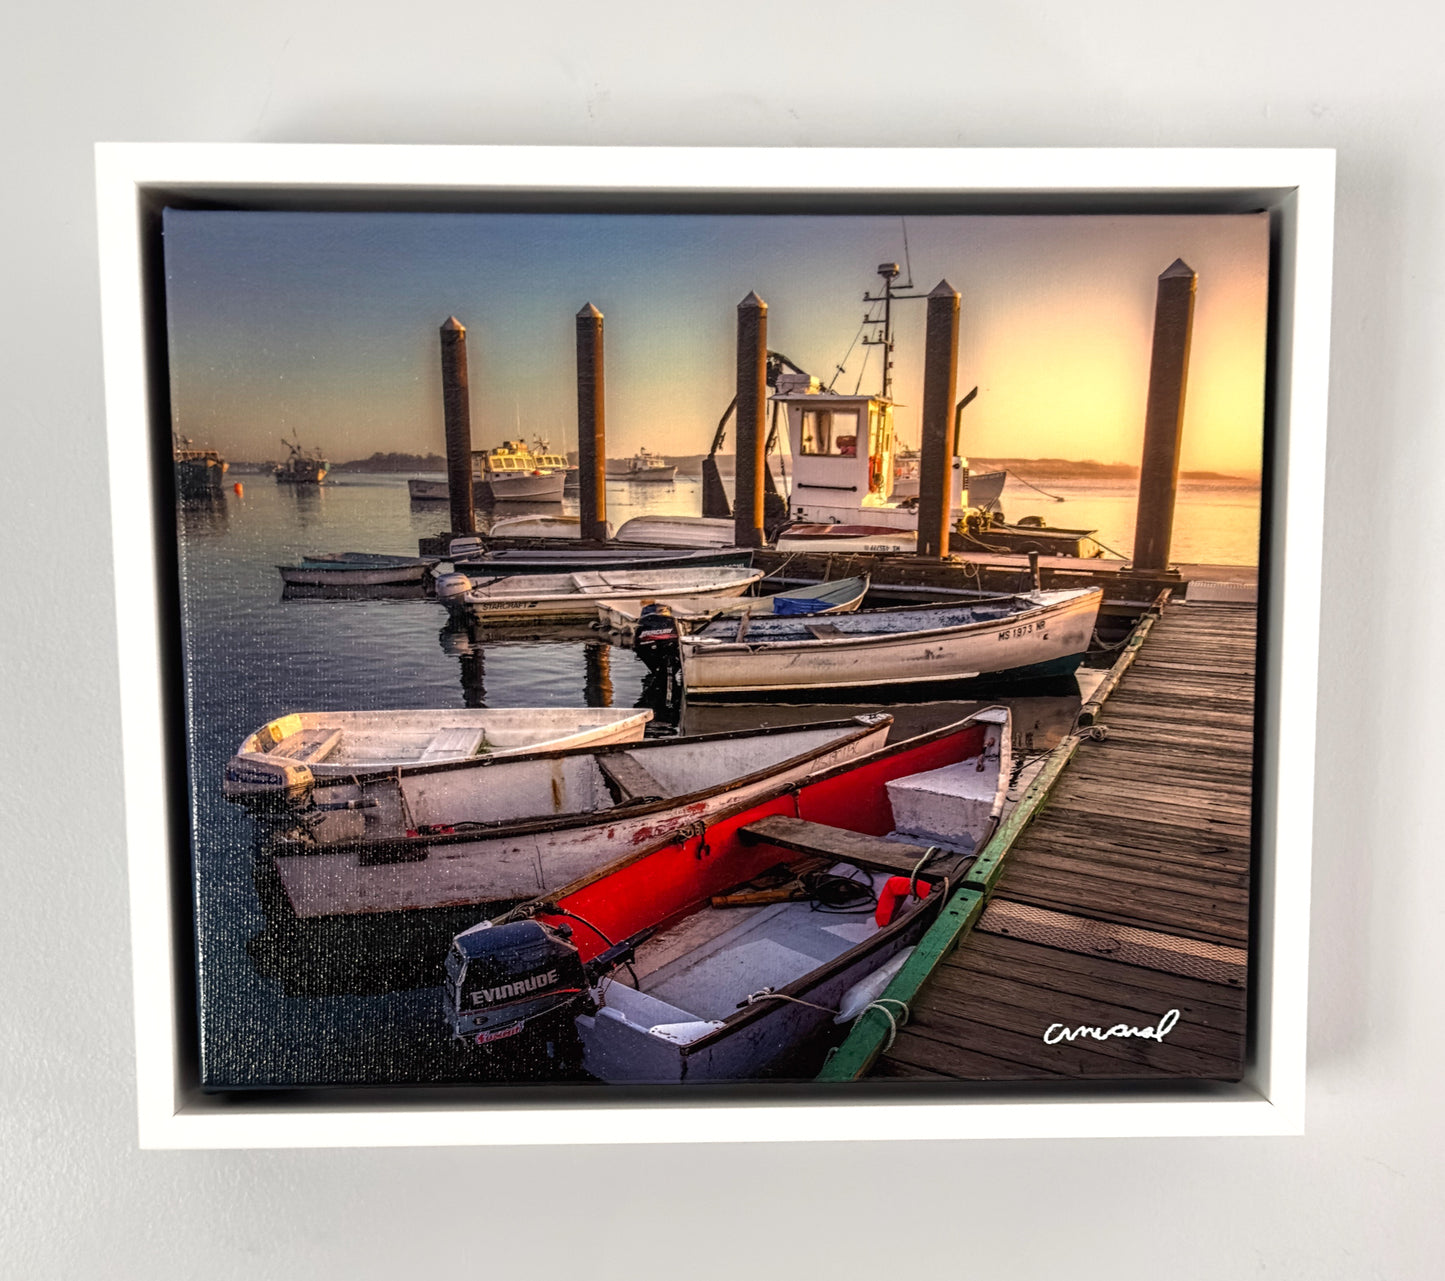 Gallery Wrapped Canvas in a White Wooden Frame - Chatham Pier